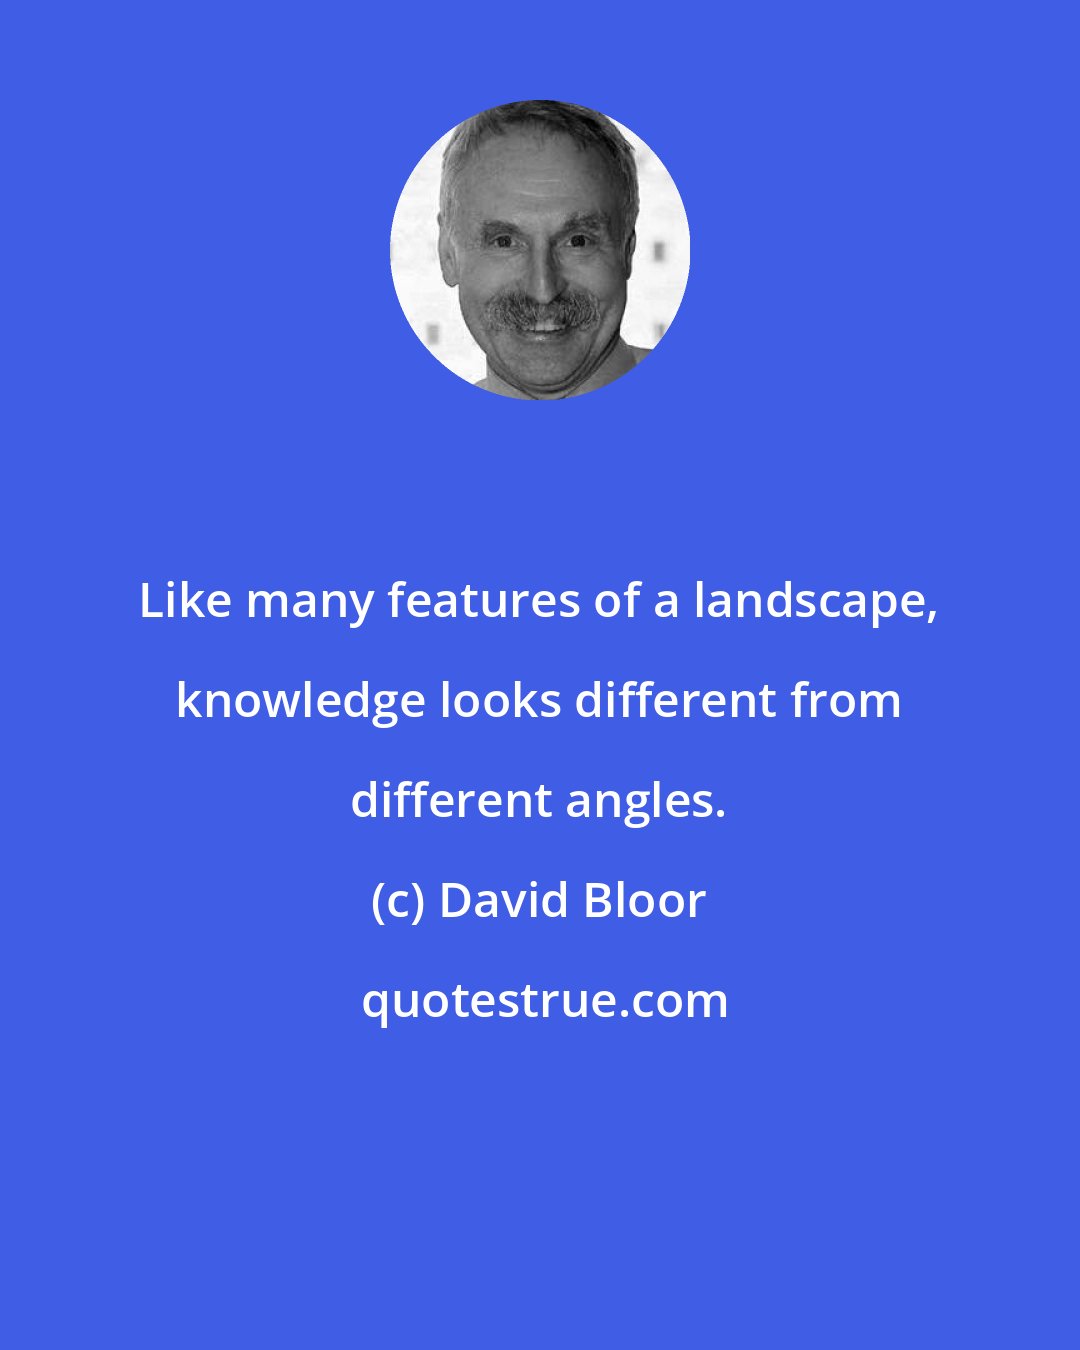 David Bloor: Like many features of a landscape, knowledge looks different from different angles.